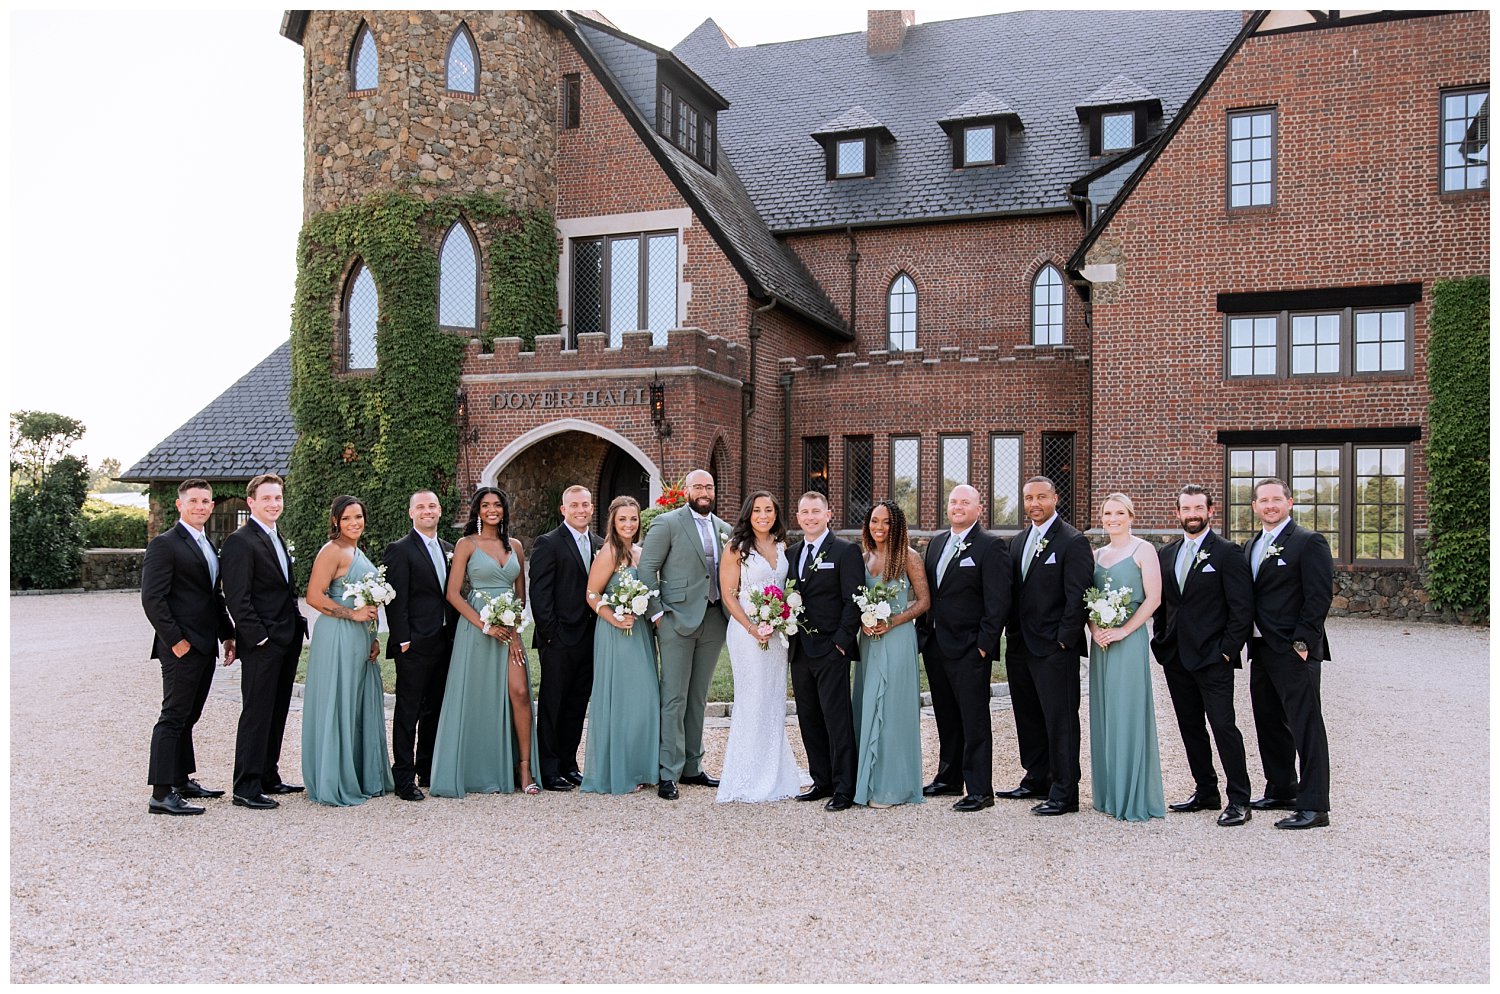 Bridal Party Portraits at Dover Hall Estate in Richmond, Virginia